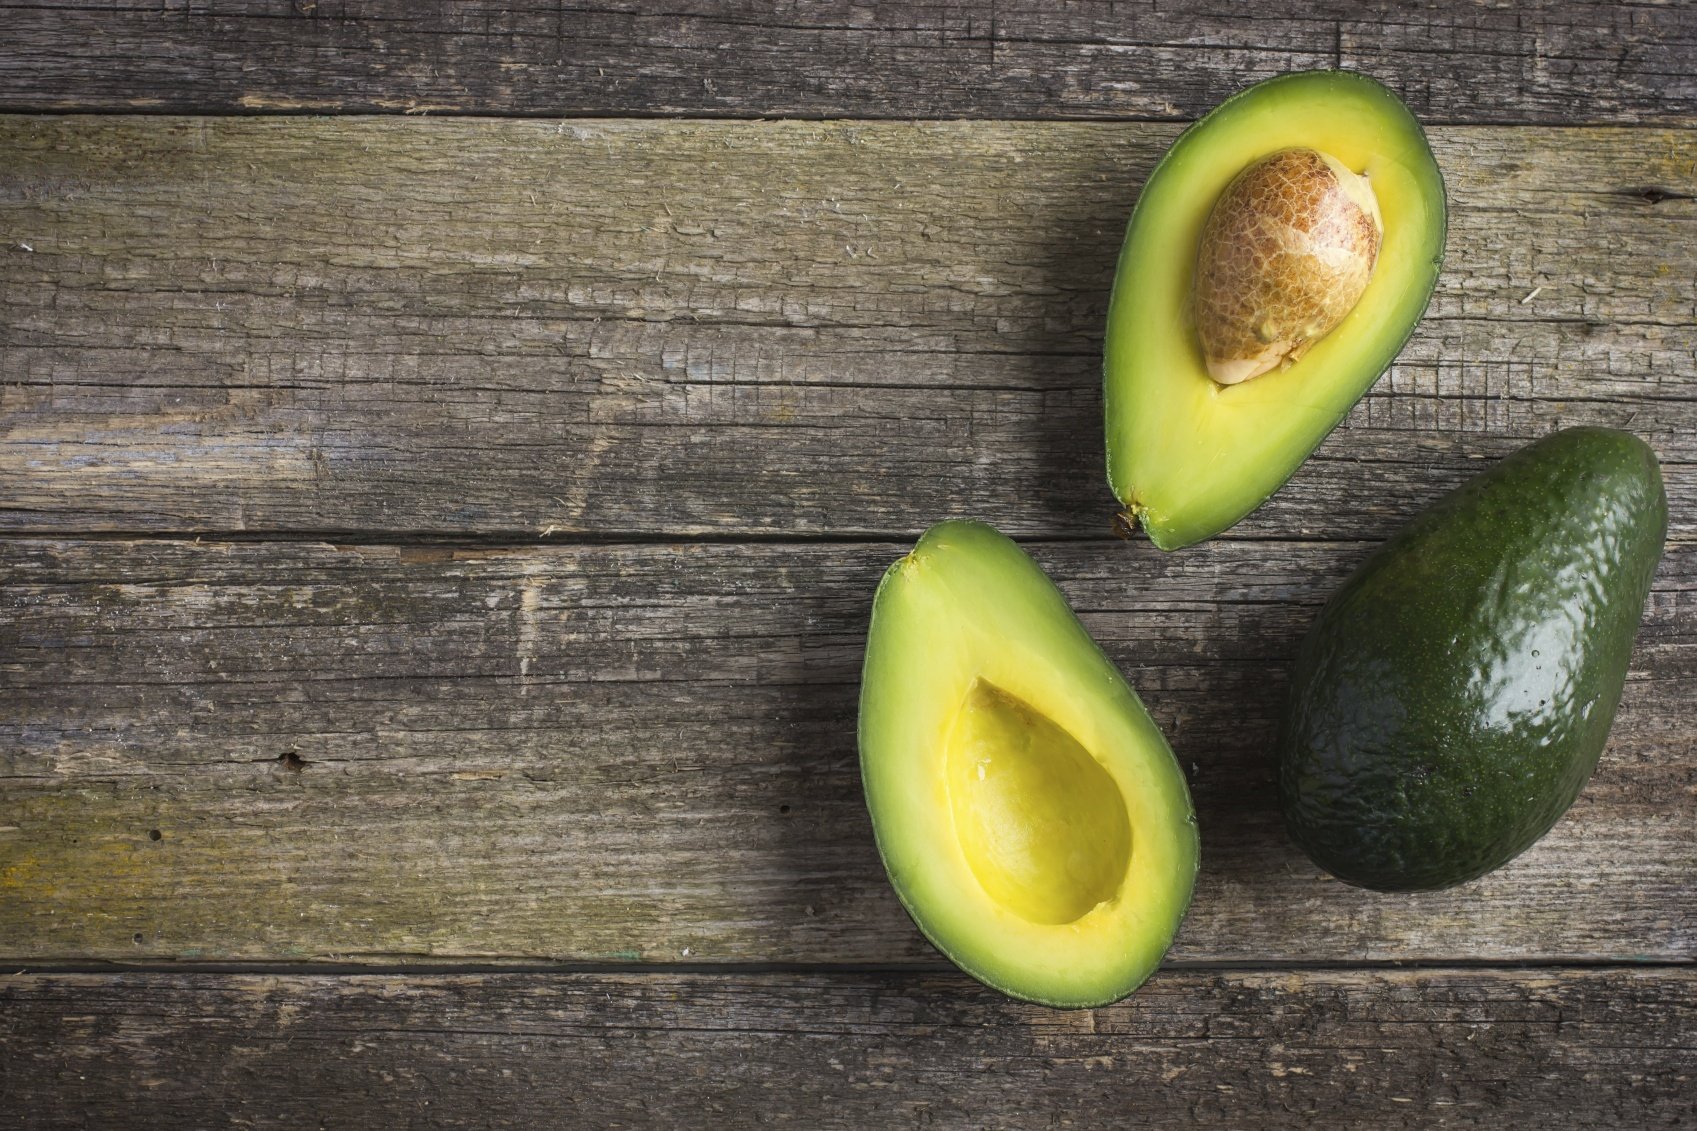 This Is What Will Happen When You Eat Avocados Every Day